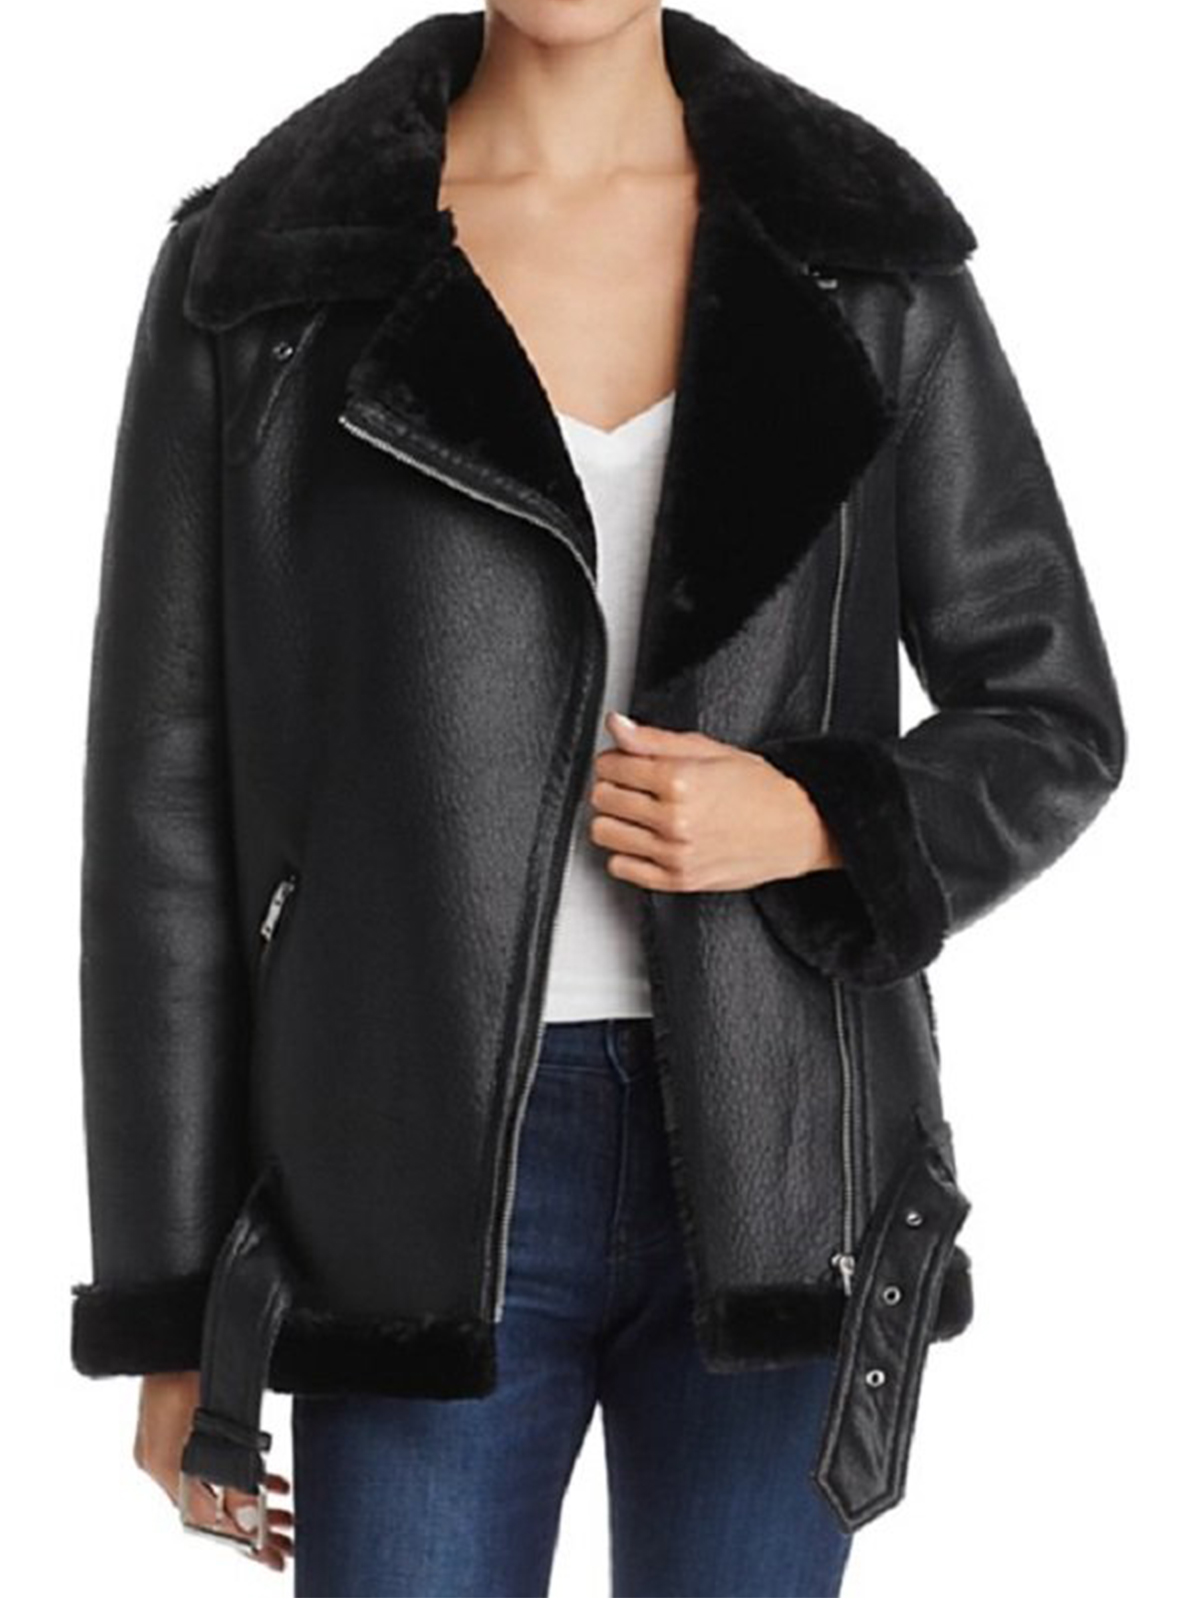 Lesley-Ann Brandt Shearling Leather Jacket – Bay Perfect